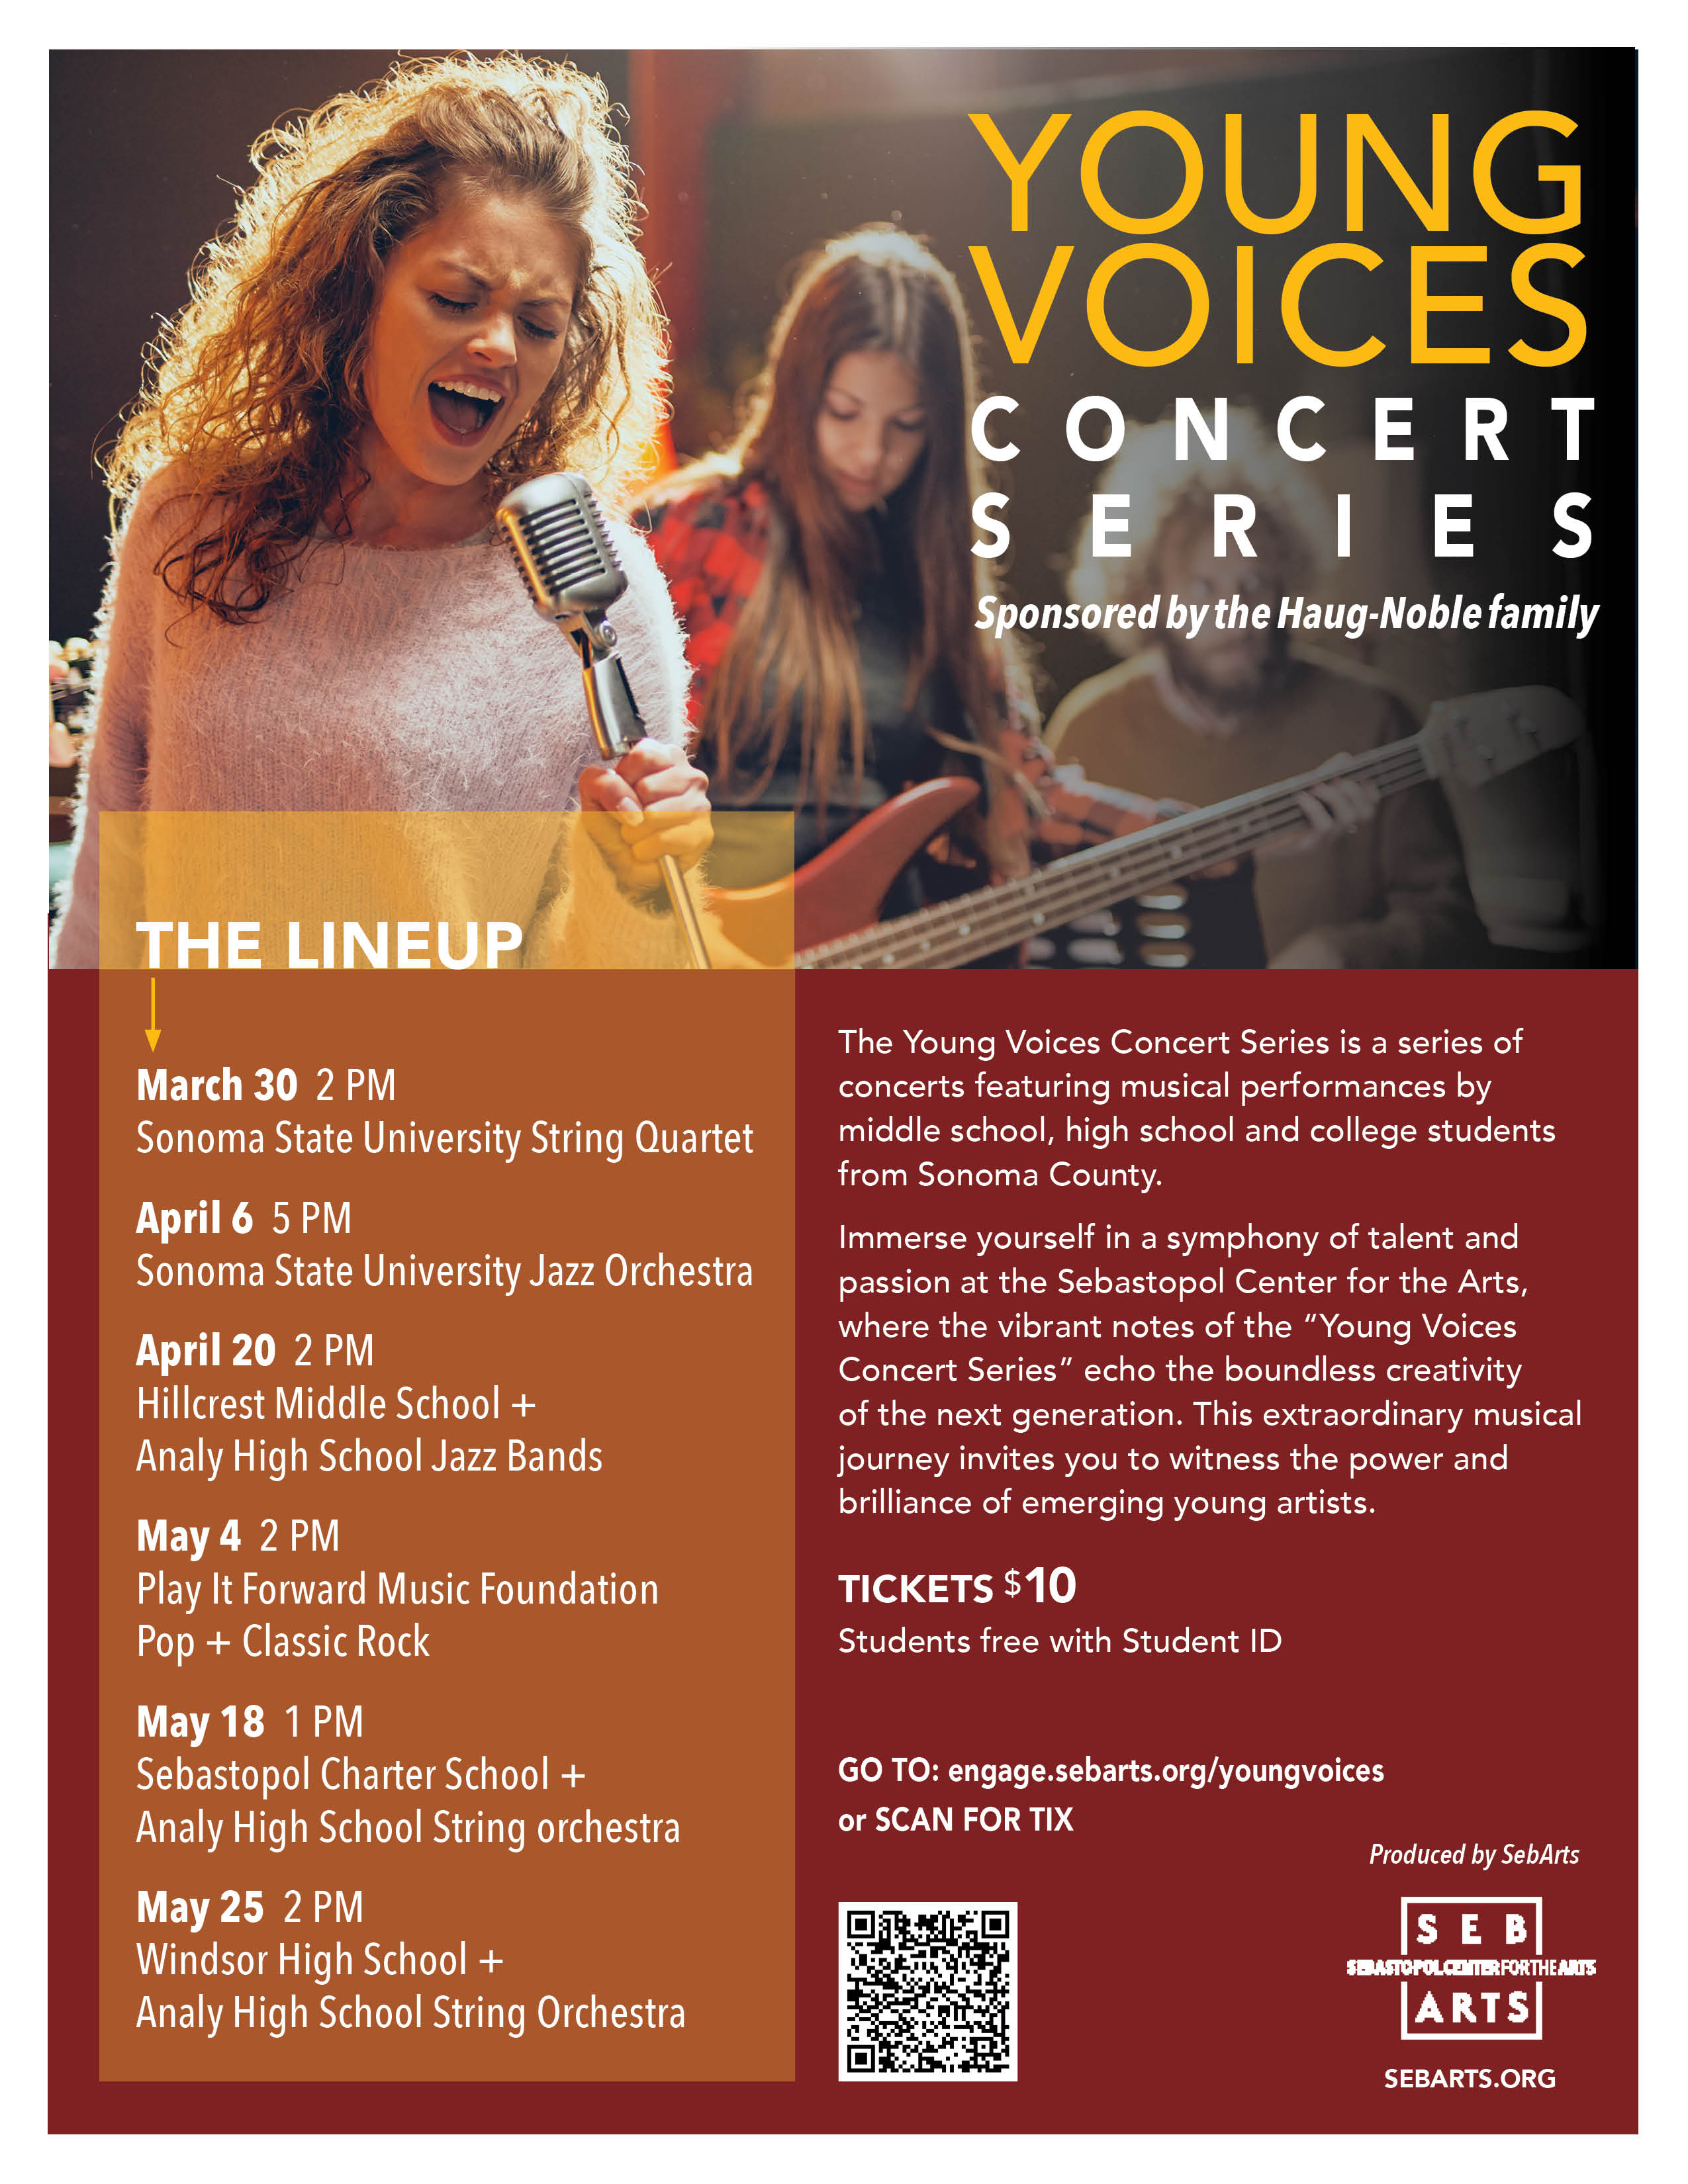 Young Voices Concert Series poster with The Lineup